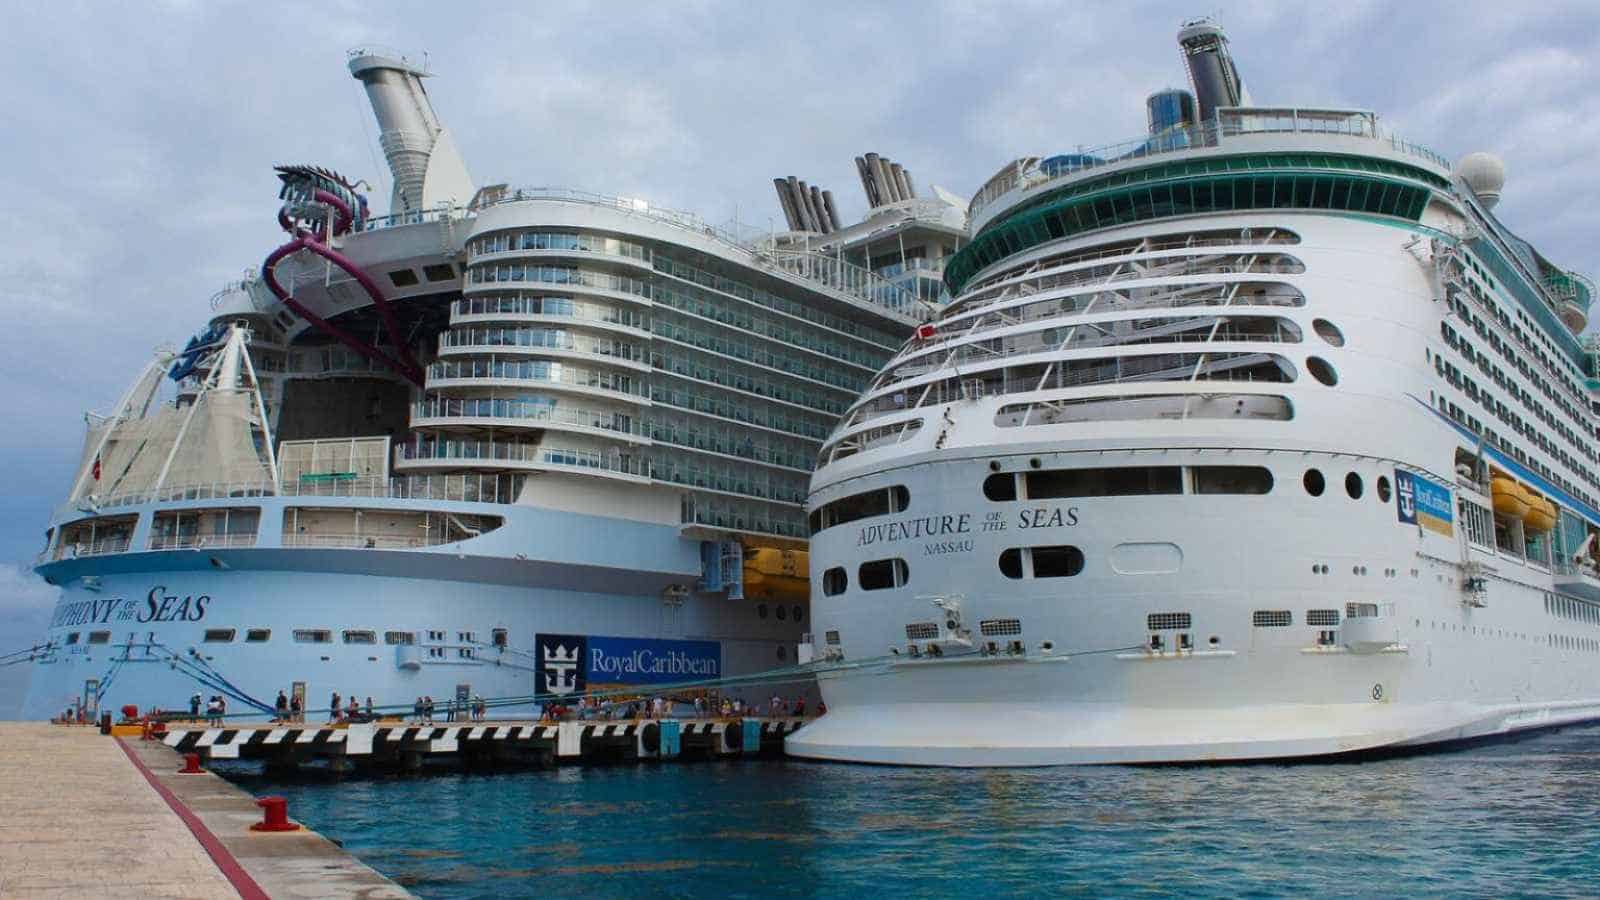 <p>Embarking on a Royal Caribbean cruise is like stepping into a world where the extraordinary is ordinary and relaxation meets adventure. With a fleet as vast as the oceans they traverse, each ship in Royal Caribbean’s armada provides travelers with a unique voyage experience.</p><p><a href="https://frenzhub.com/royal-caribbean-cruise/">Planning a Royal Caribbean Cruise? Discover the 5 Top-Rated Cruise Ships with Our Complete Guide</a></p>